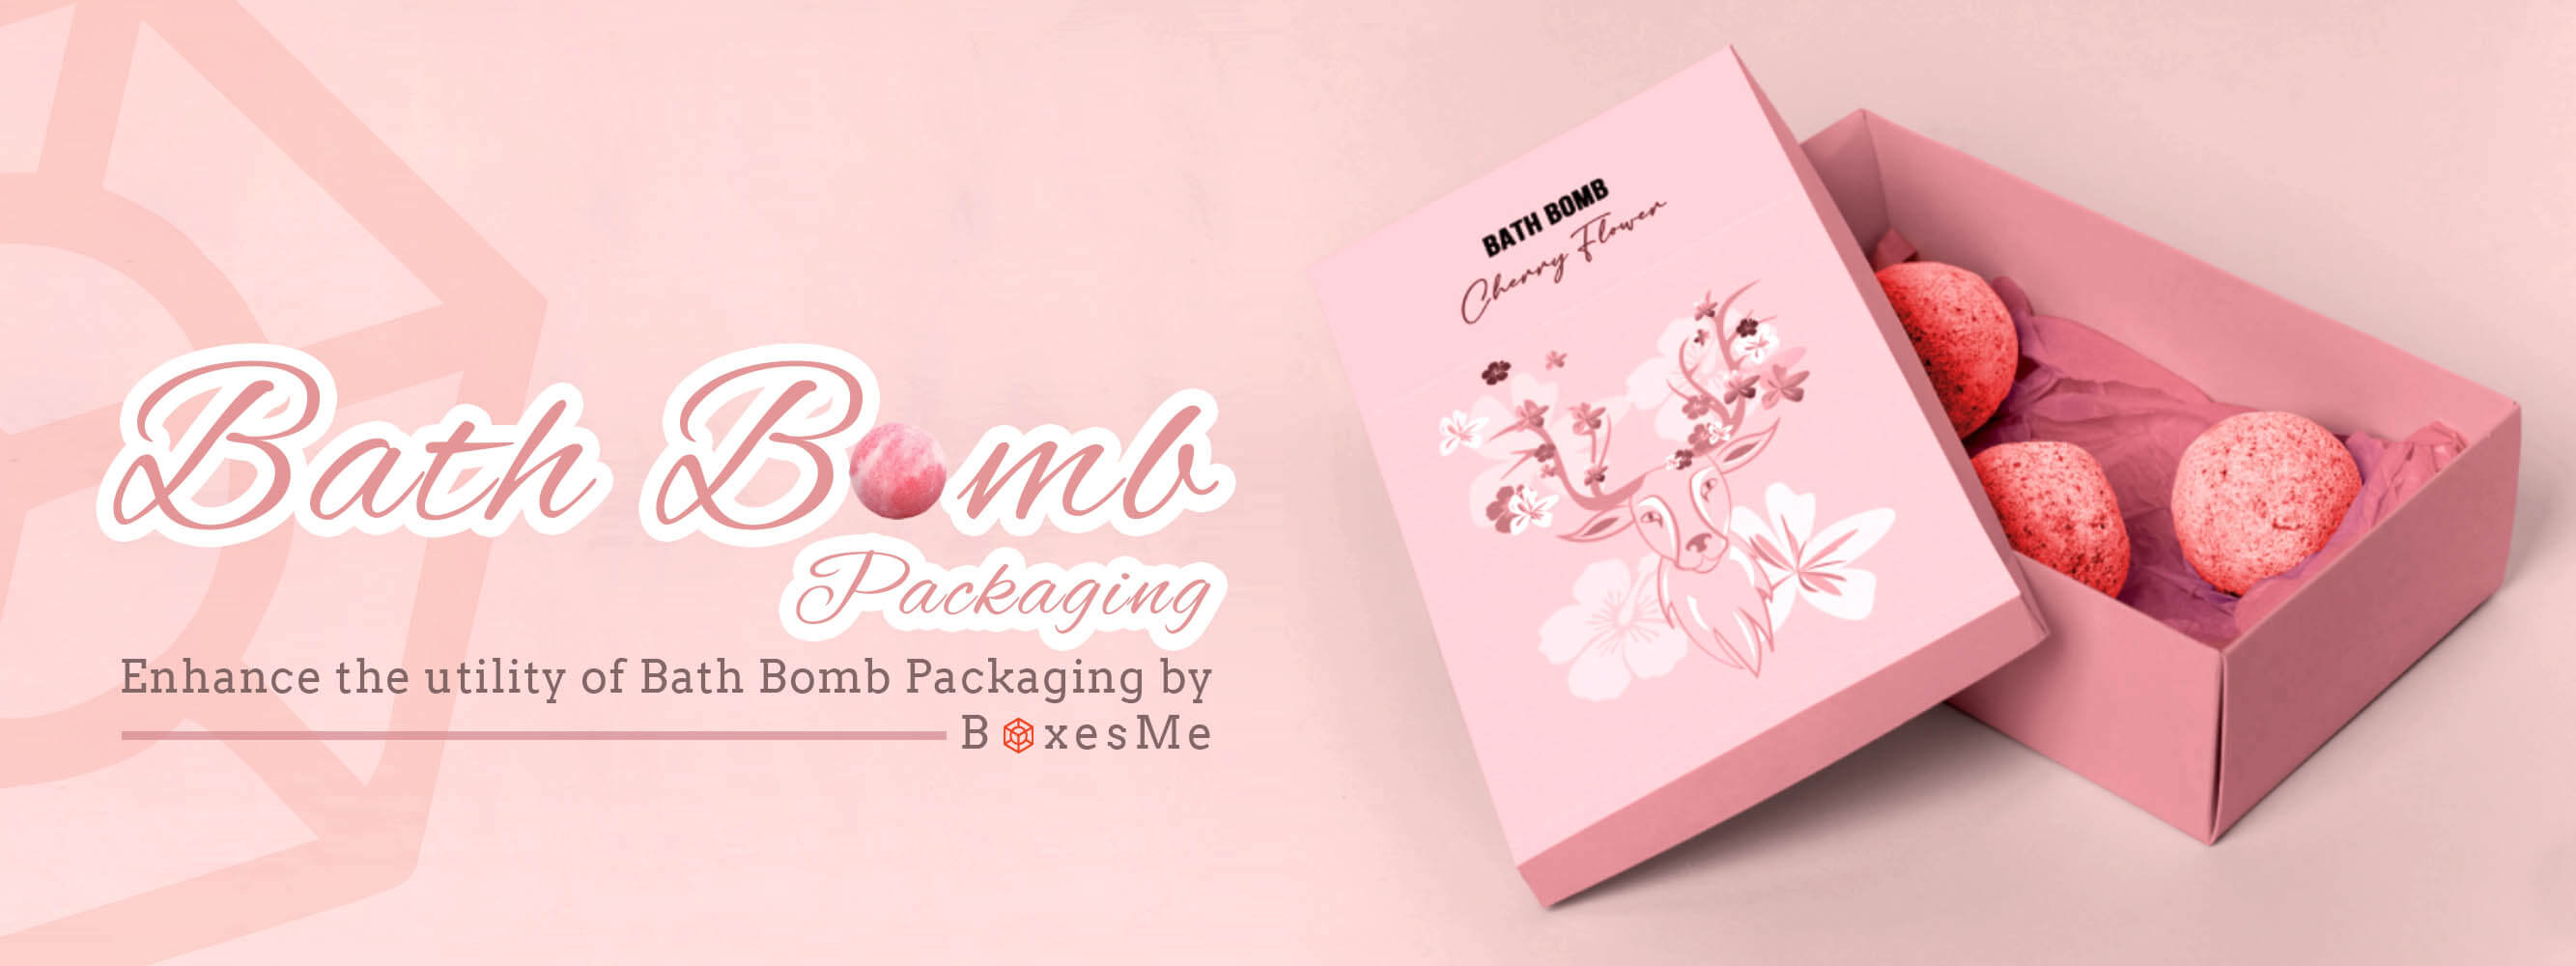 Enhance the utility of Bath Bomb Packaging by BoxesMe